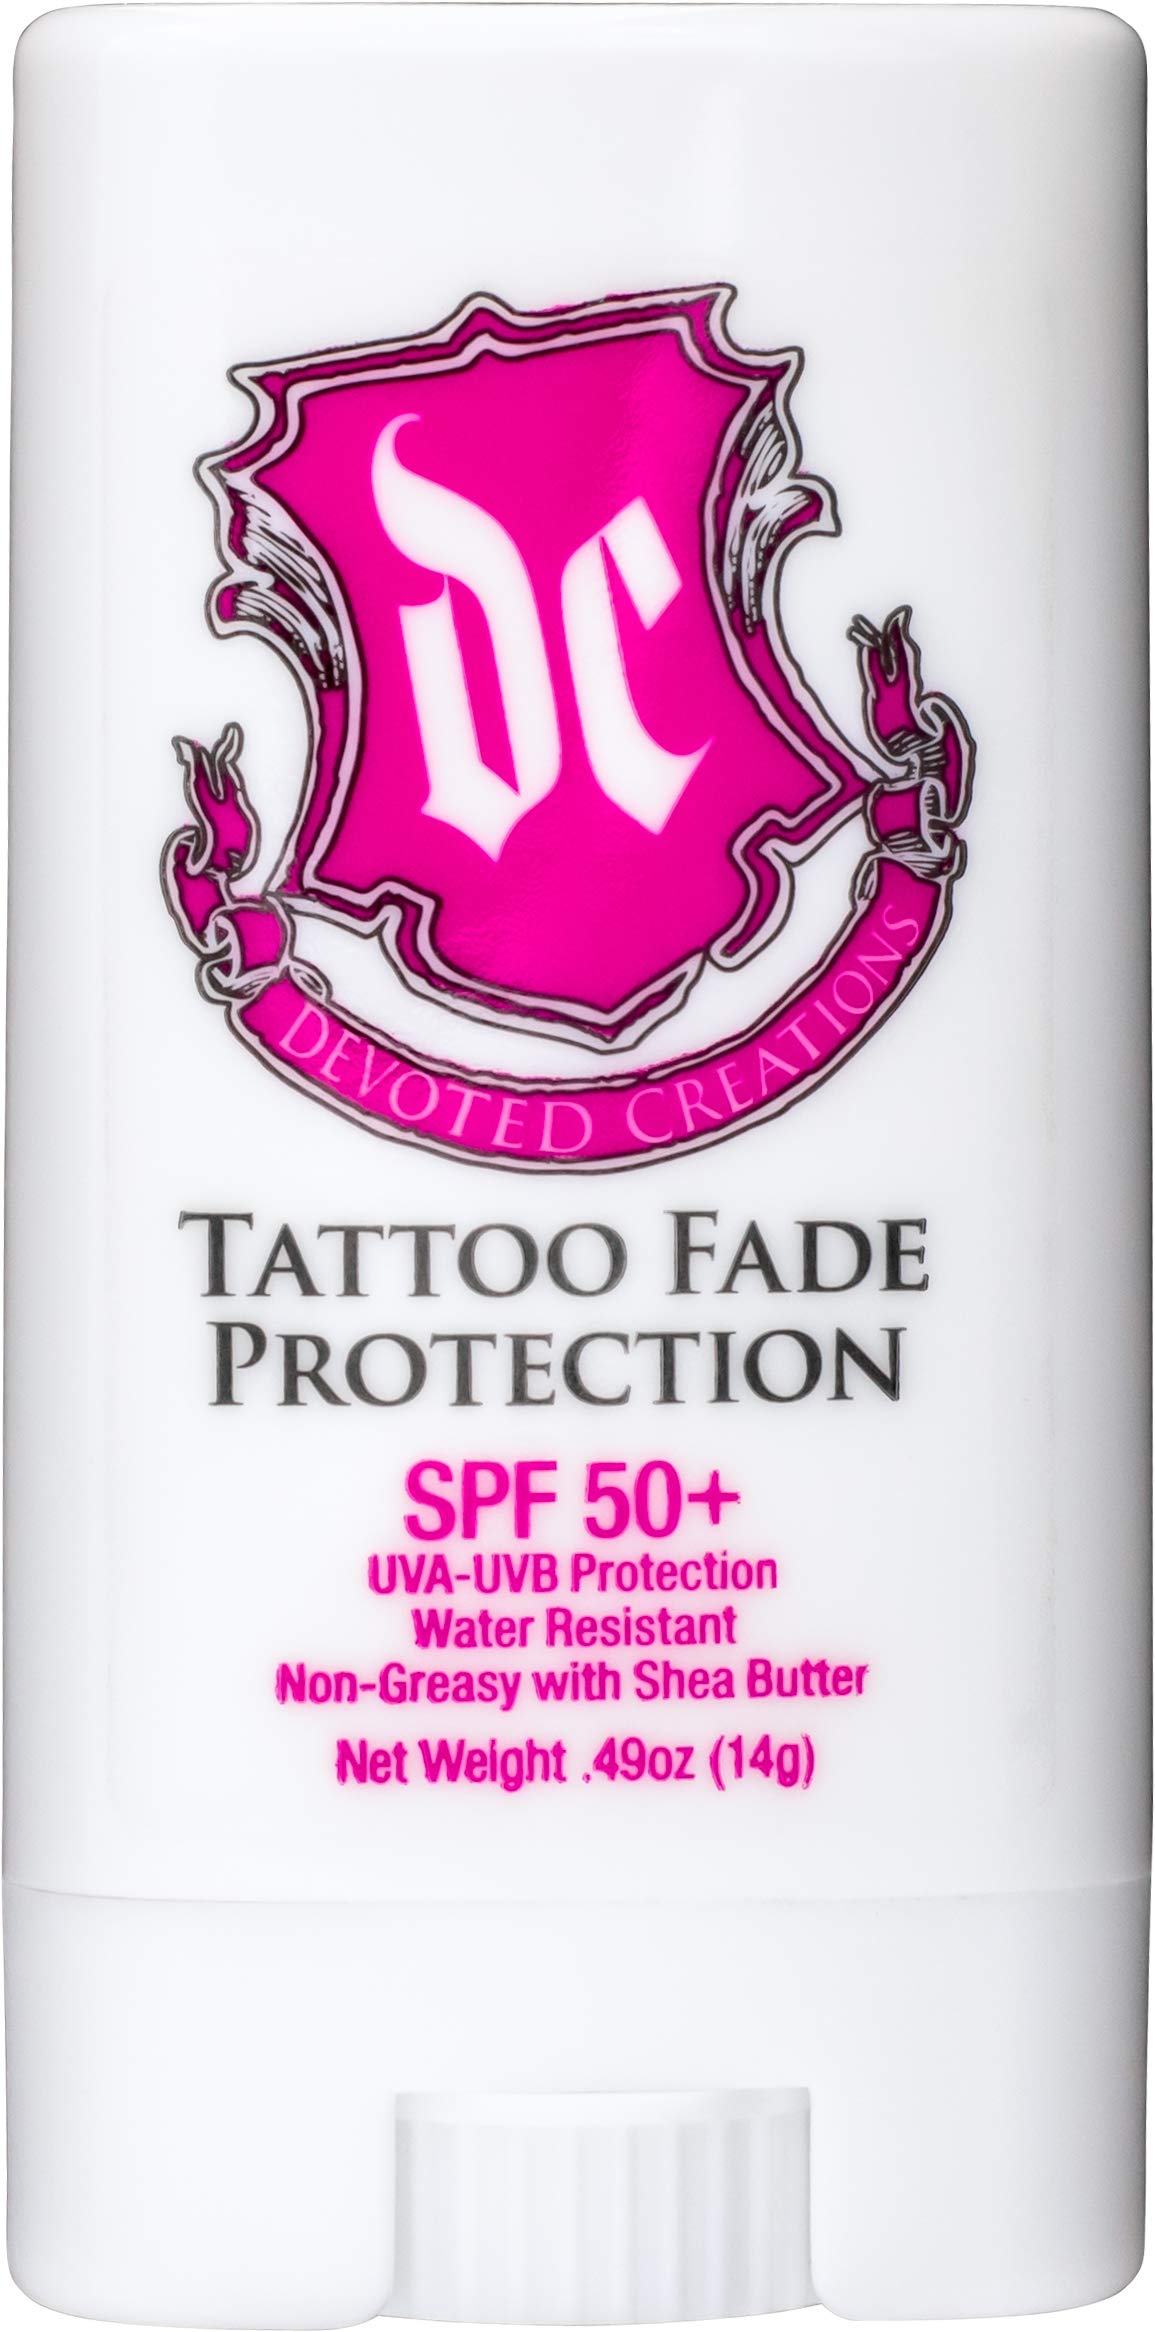 How to protect tattoos from sun exposure | MD Anderson Cancer Center